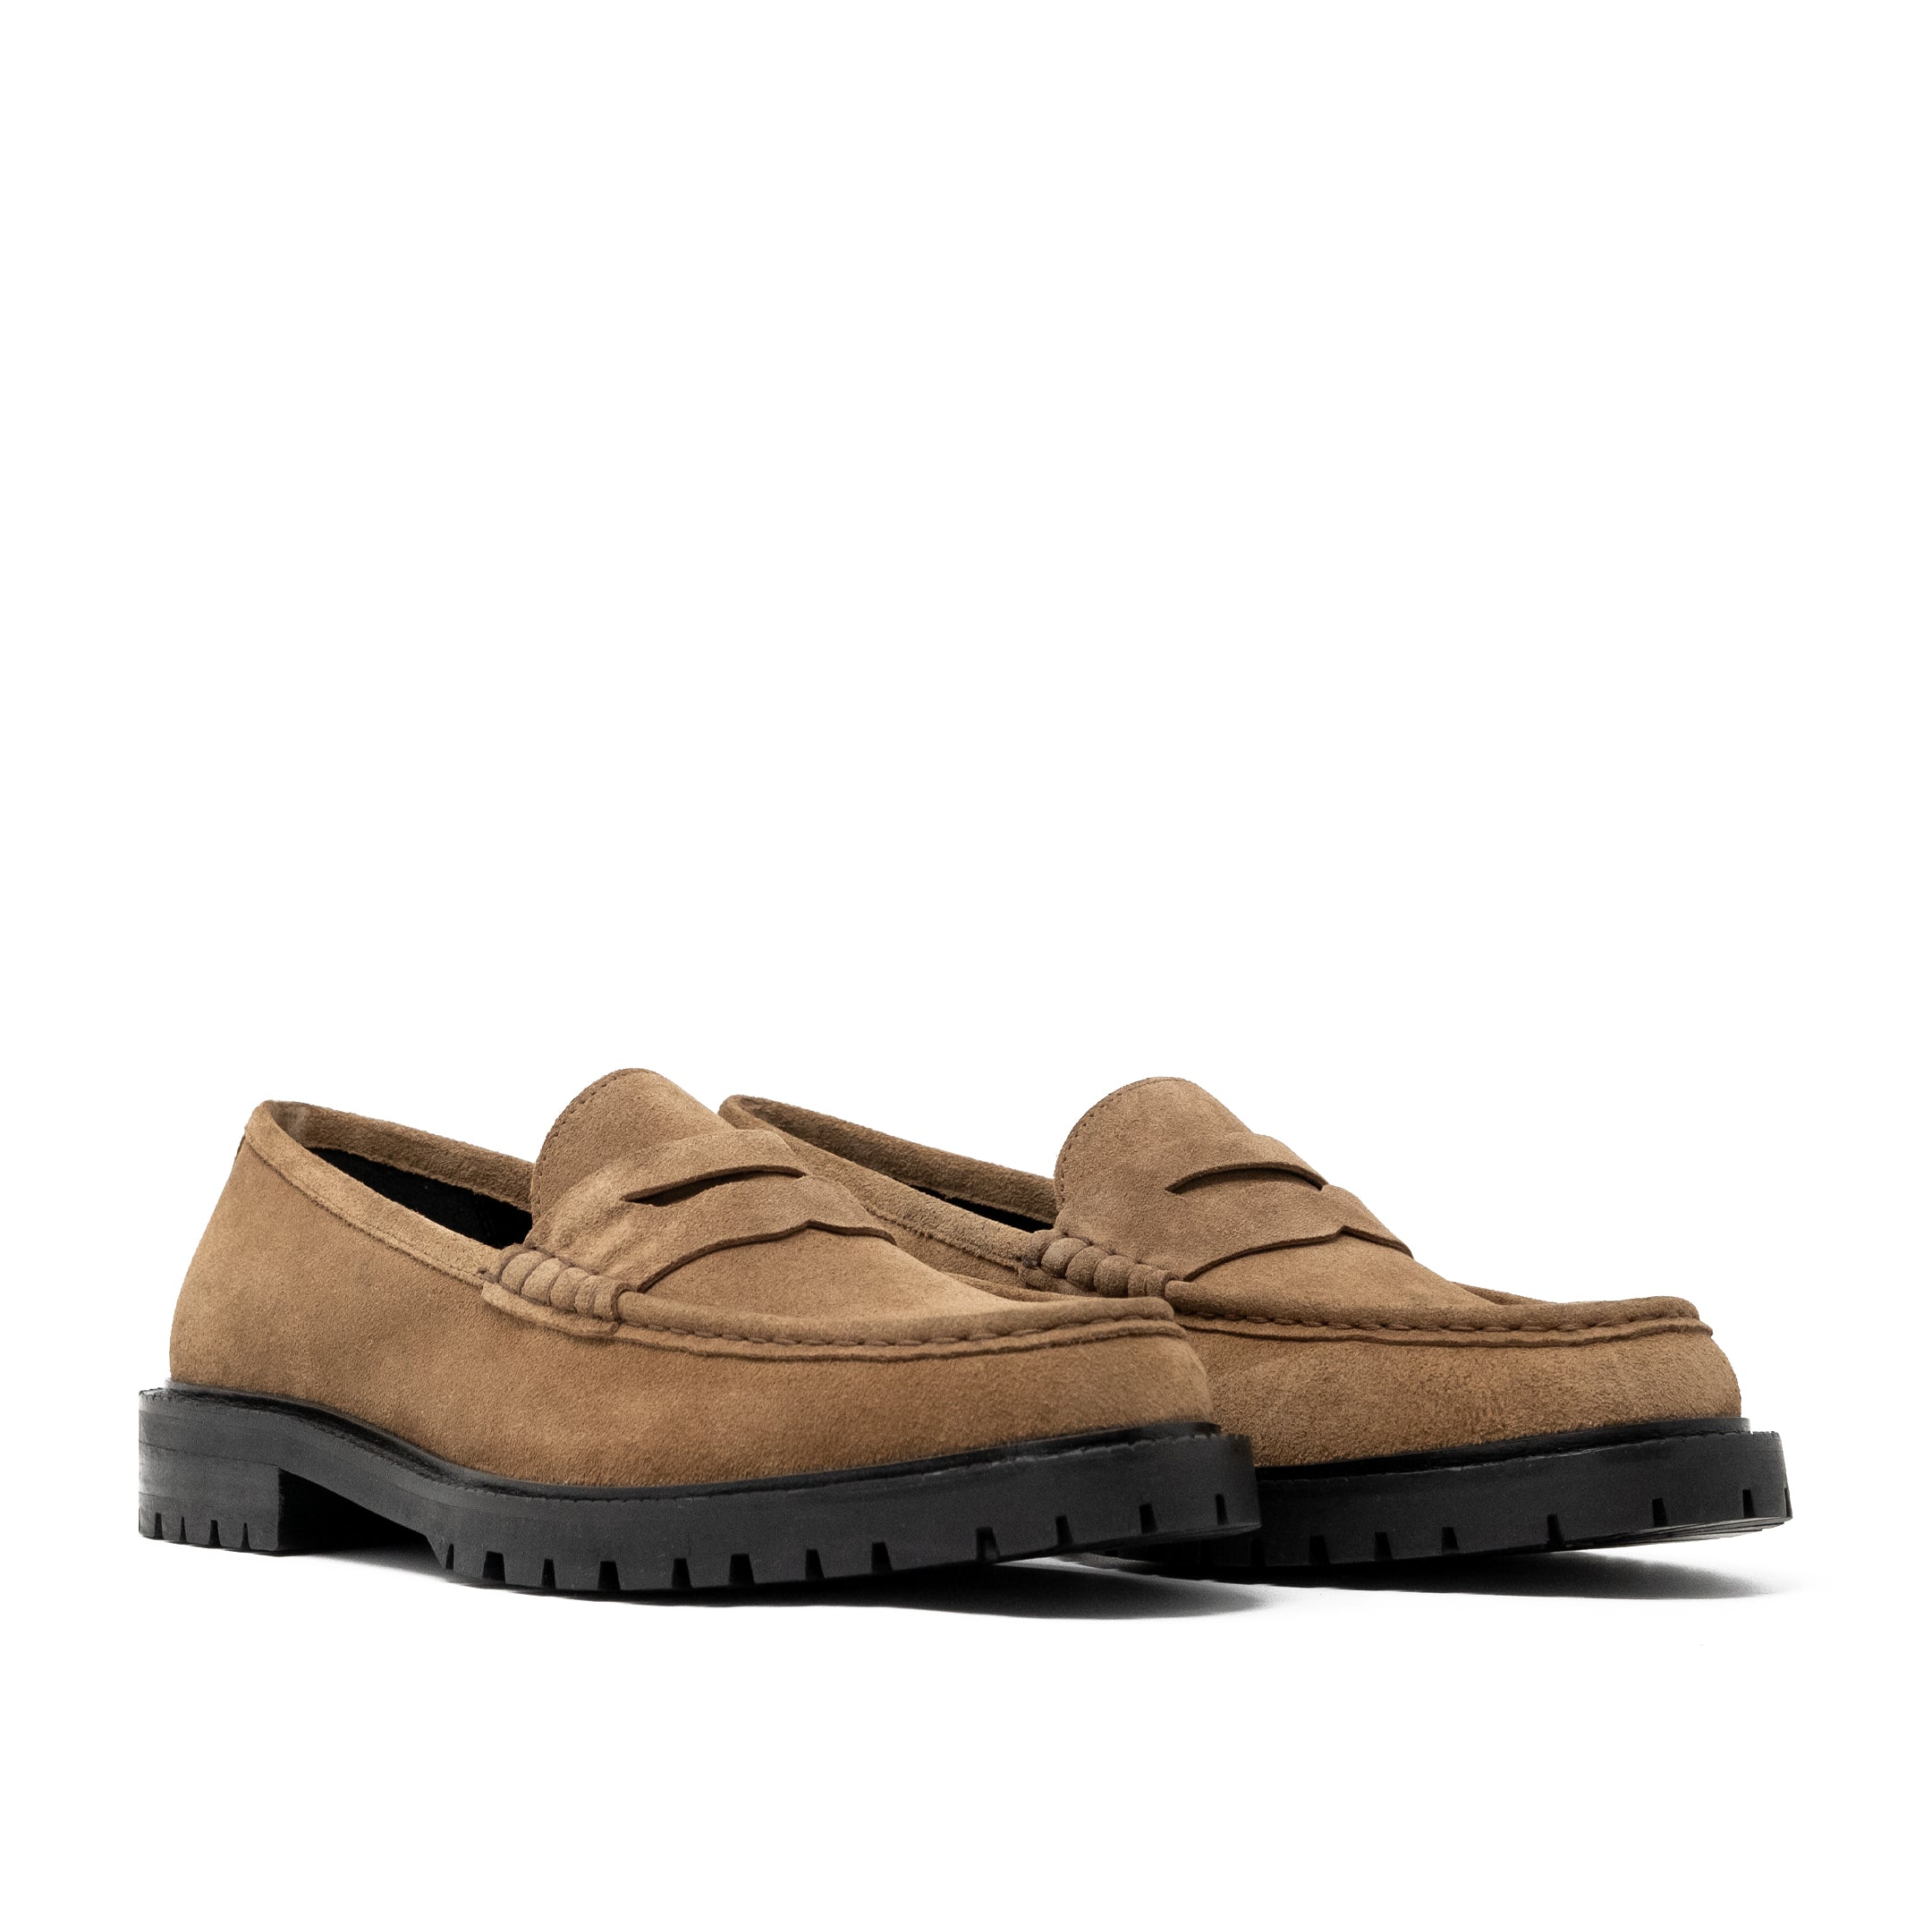 Campus Saddle Loafer - Tan Suede